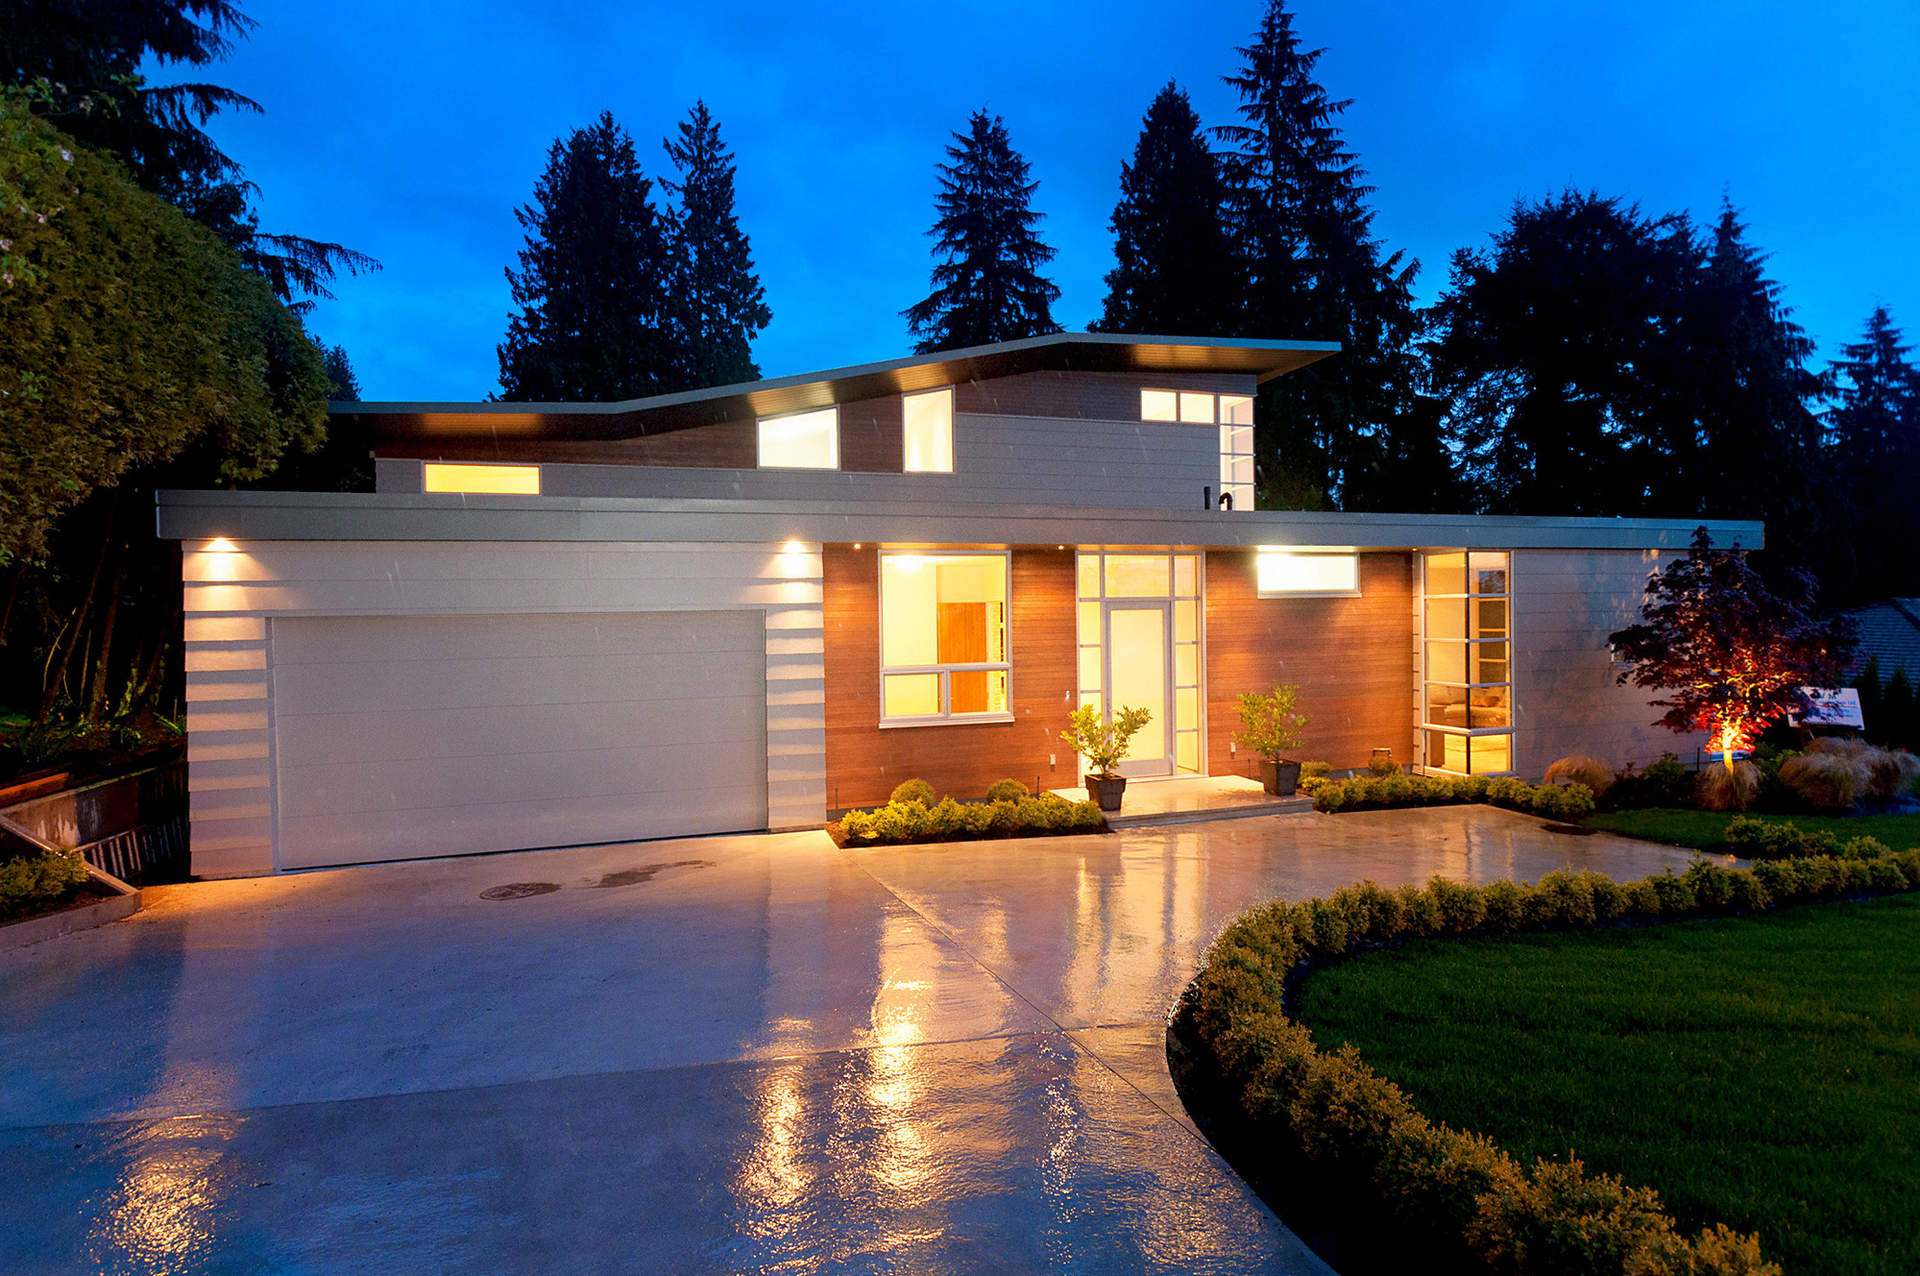 Spectacular Contemporary Residence in the Heart of Ambleside - HST include in Price!